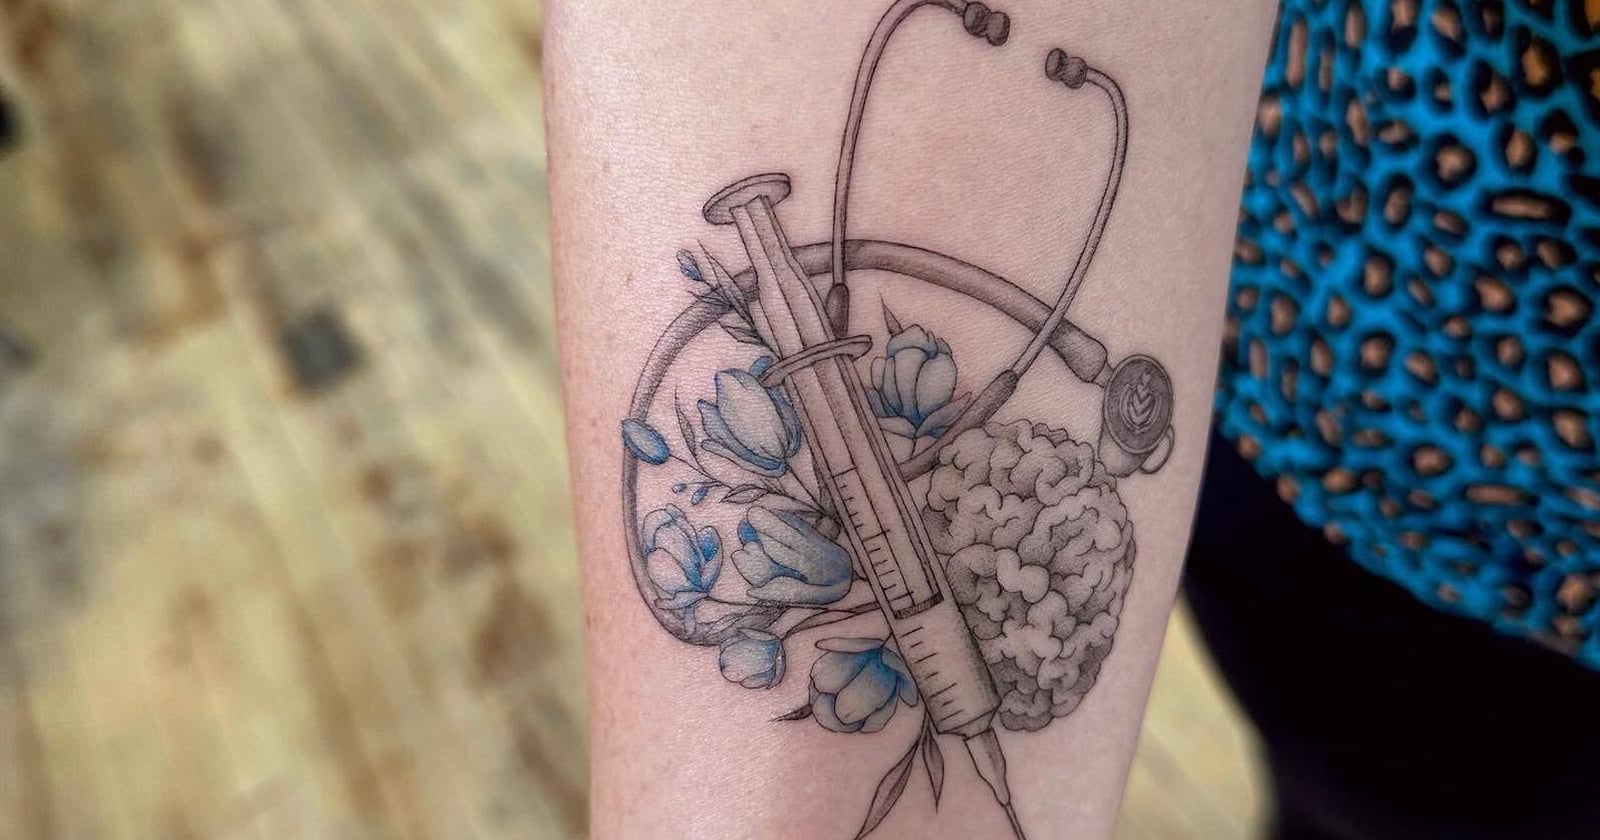 traditional nurse tattoo meaning